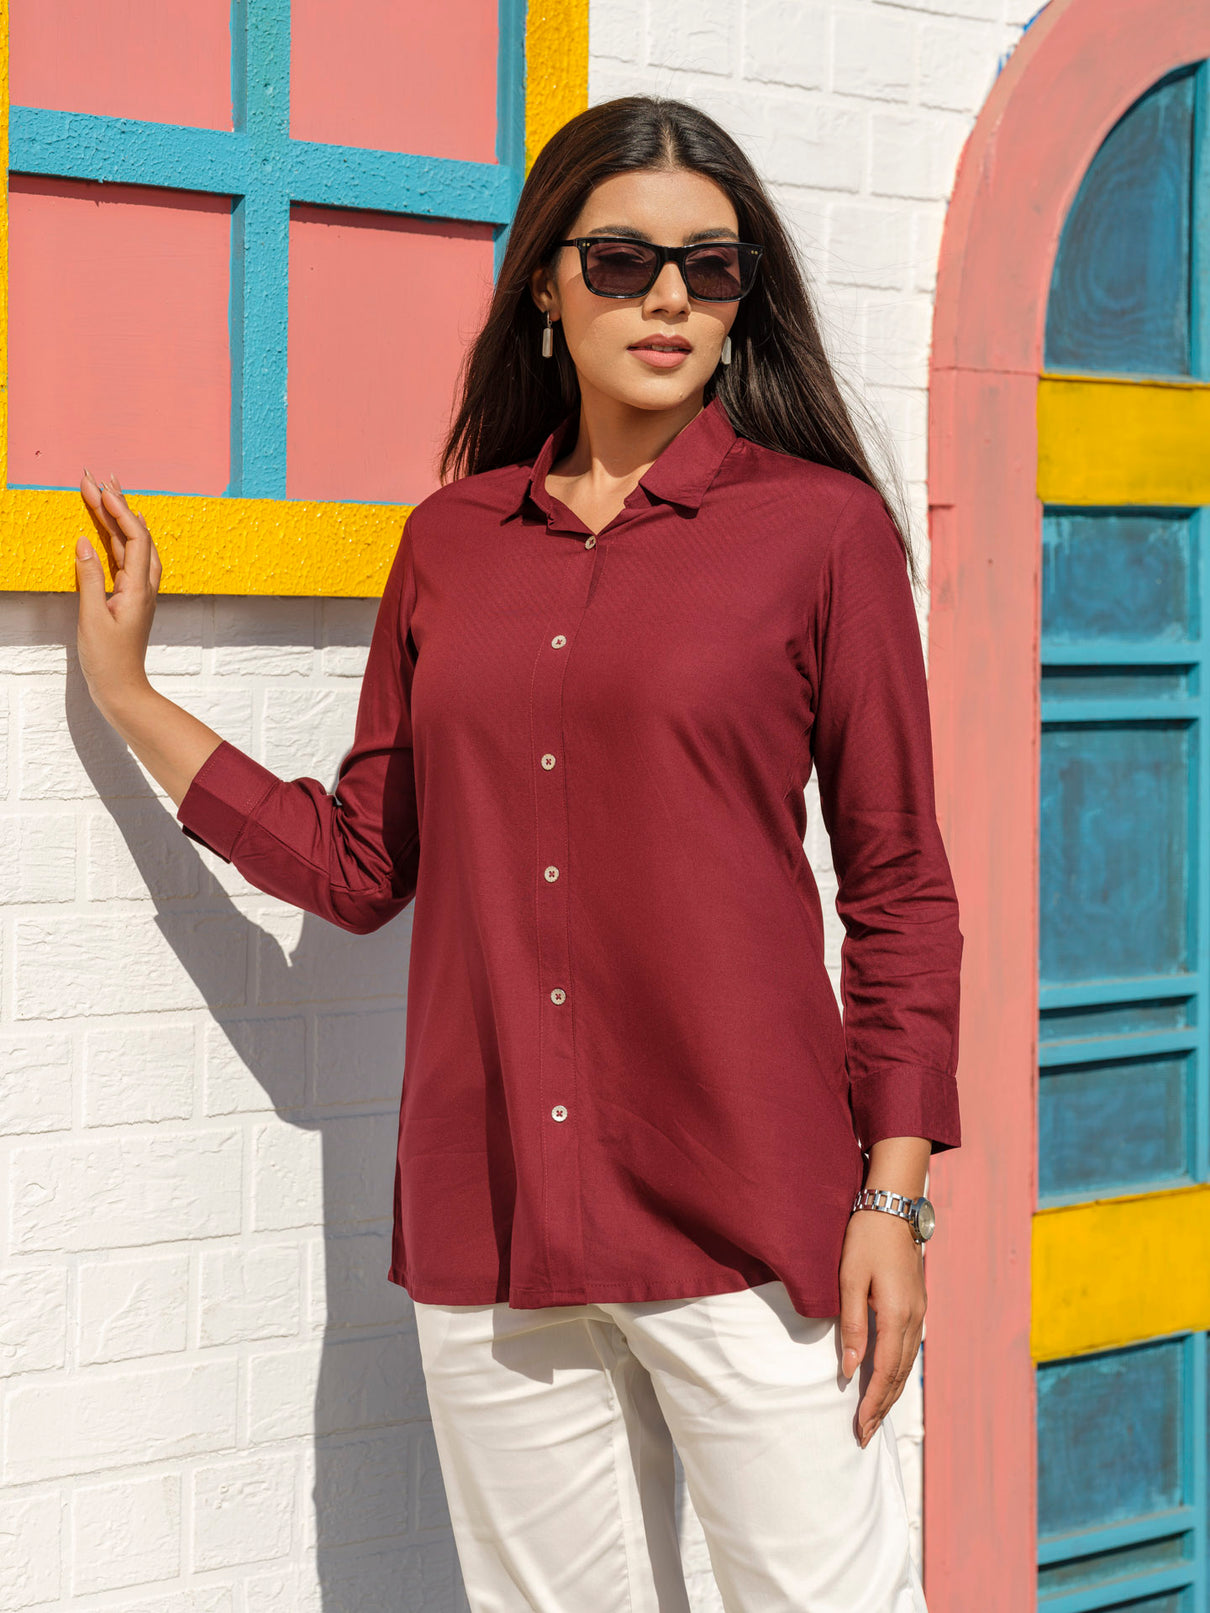 Wardrobe essential basic solid colored shirt top